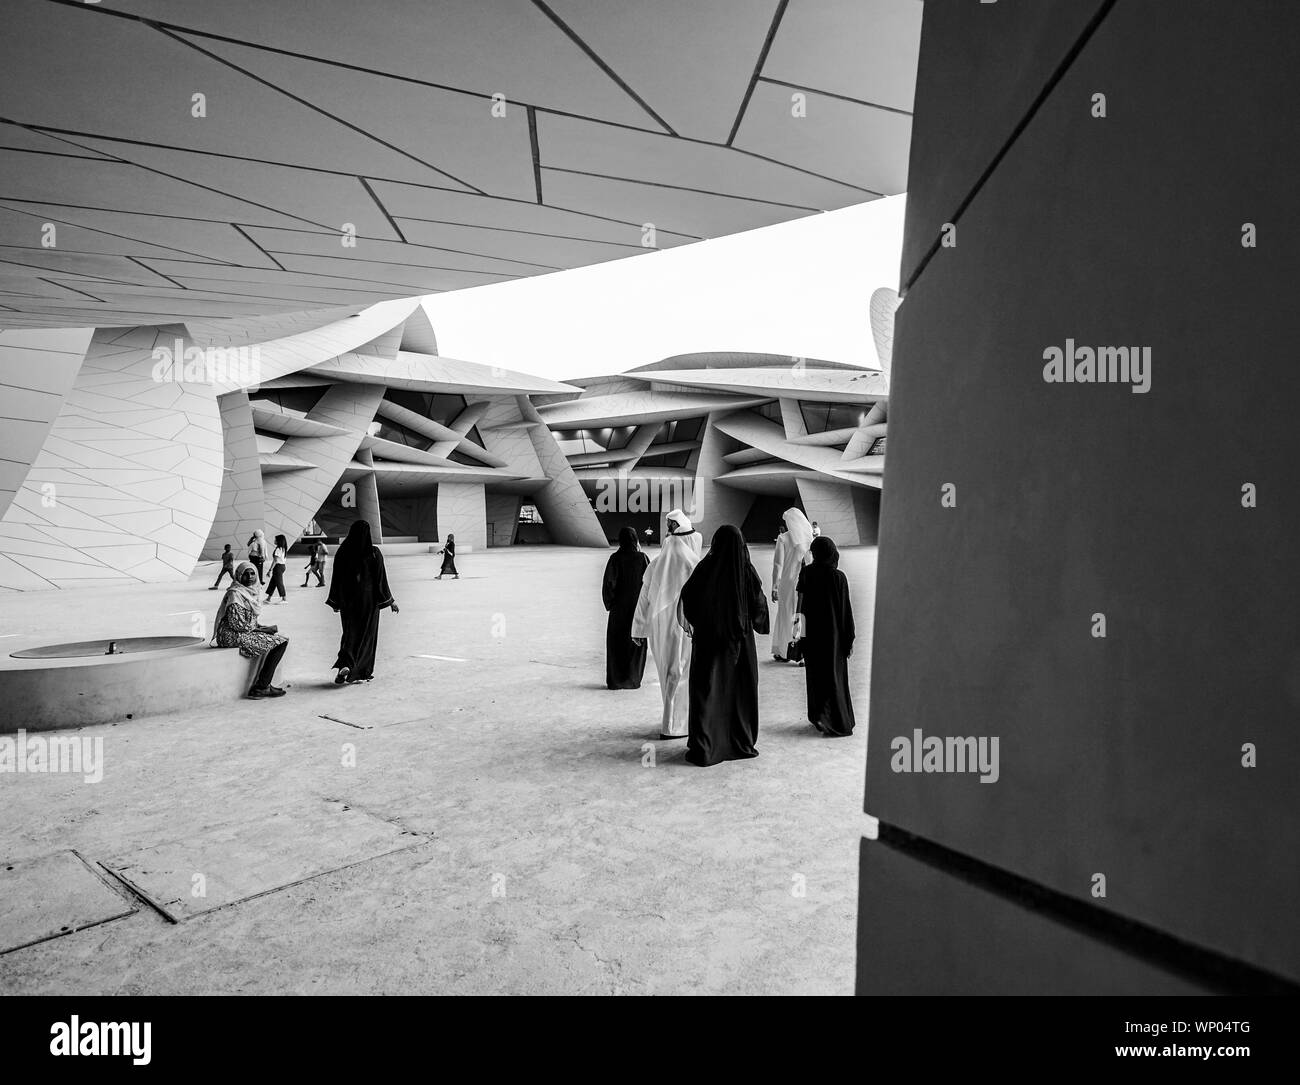 DOHA QATAR - JULY 10 2019; In black and white, people in their ...